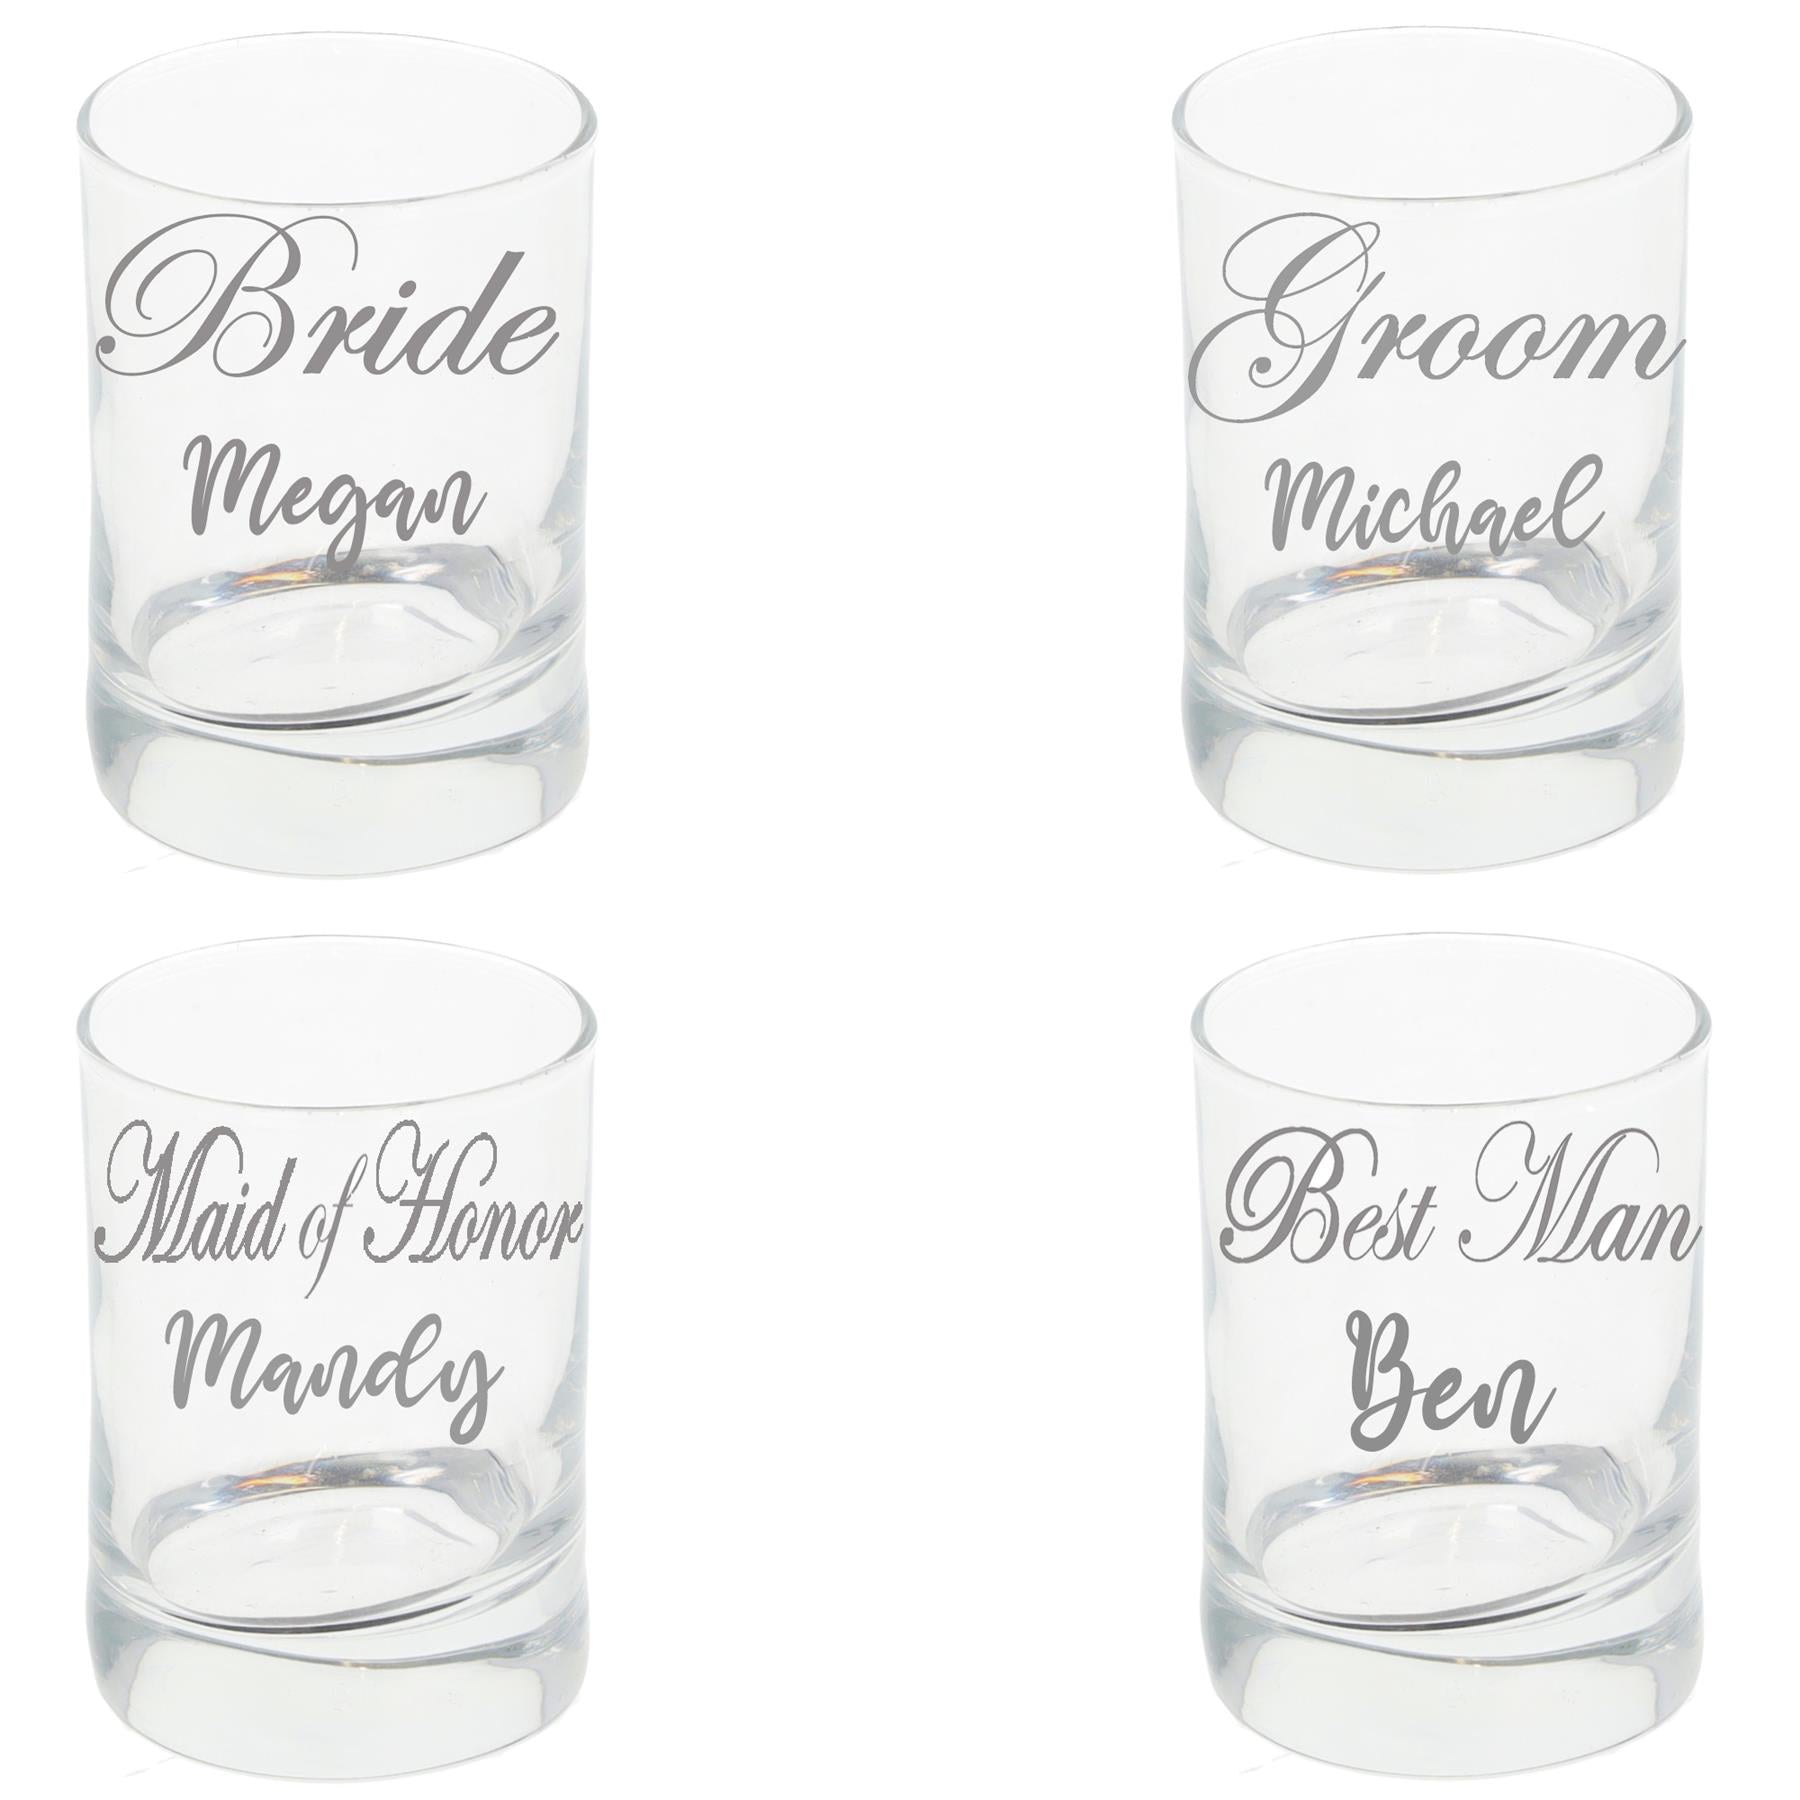 Personalised Engraved Bridal Party Shot Glass Set x4  - Always Looking Good -   